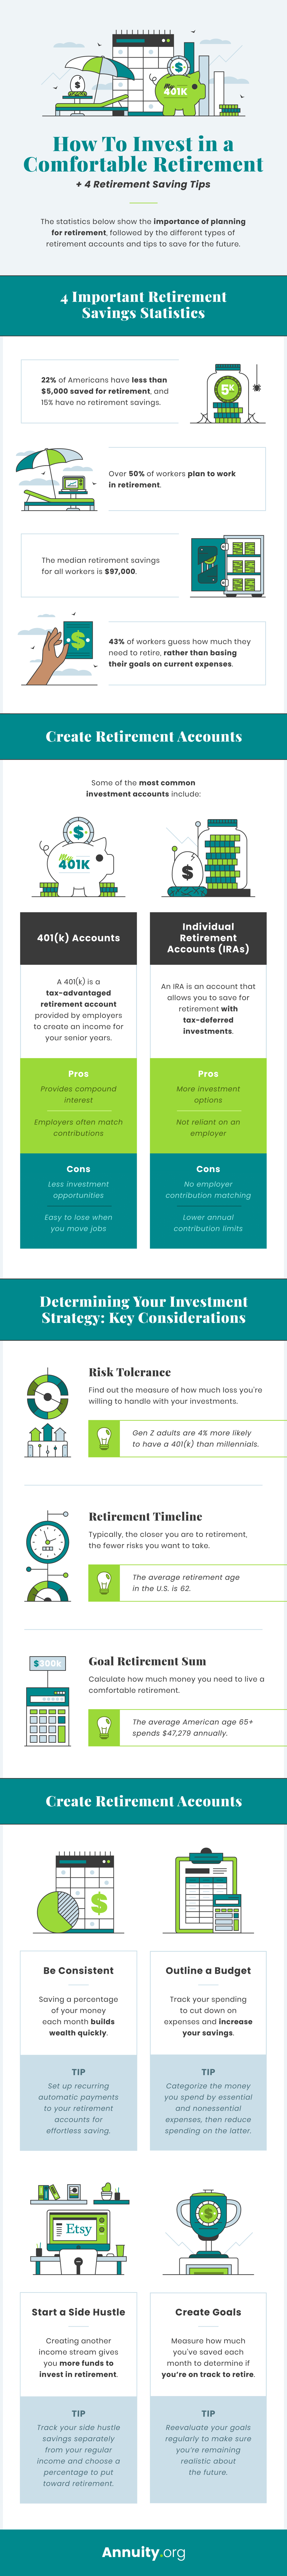 how-to-invest-in-a-comfortable-retirement-infographic.png